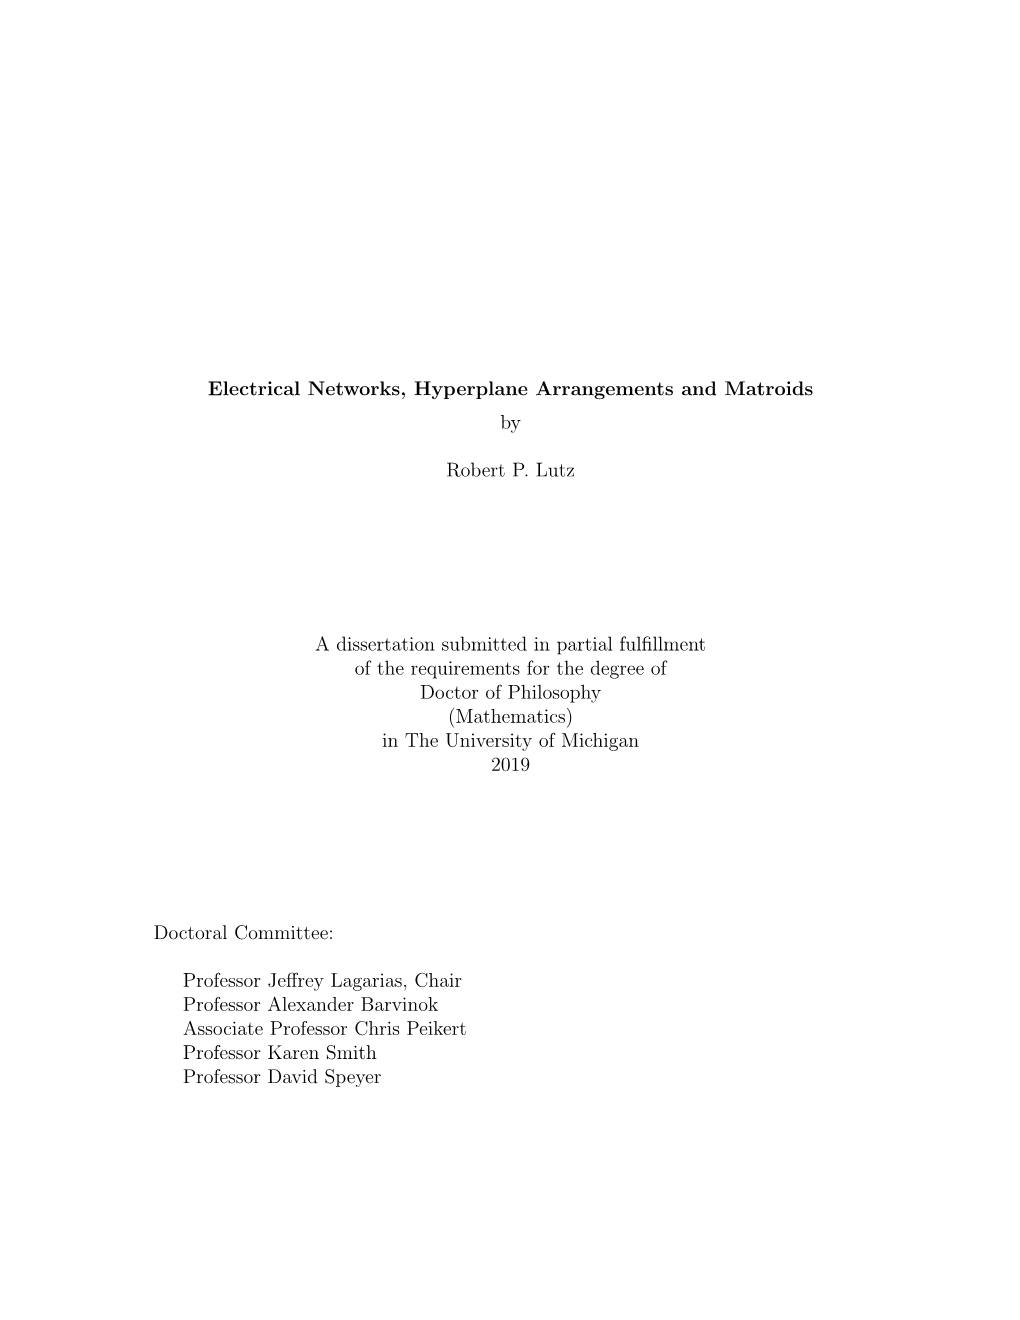 Electrical Networks, Hyperplane Arrangements and Matroids By